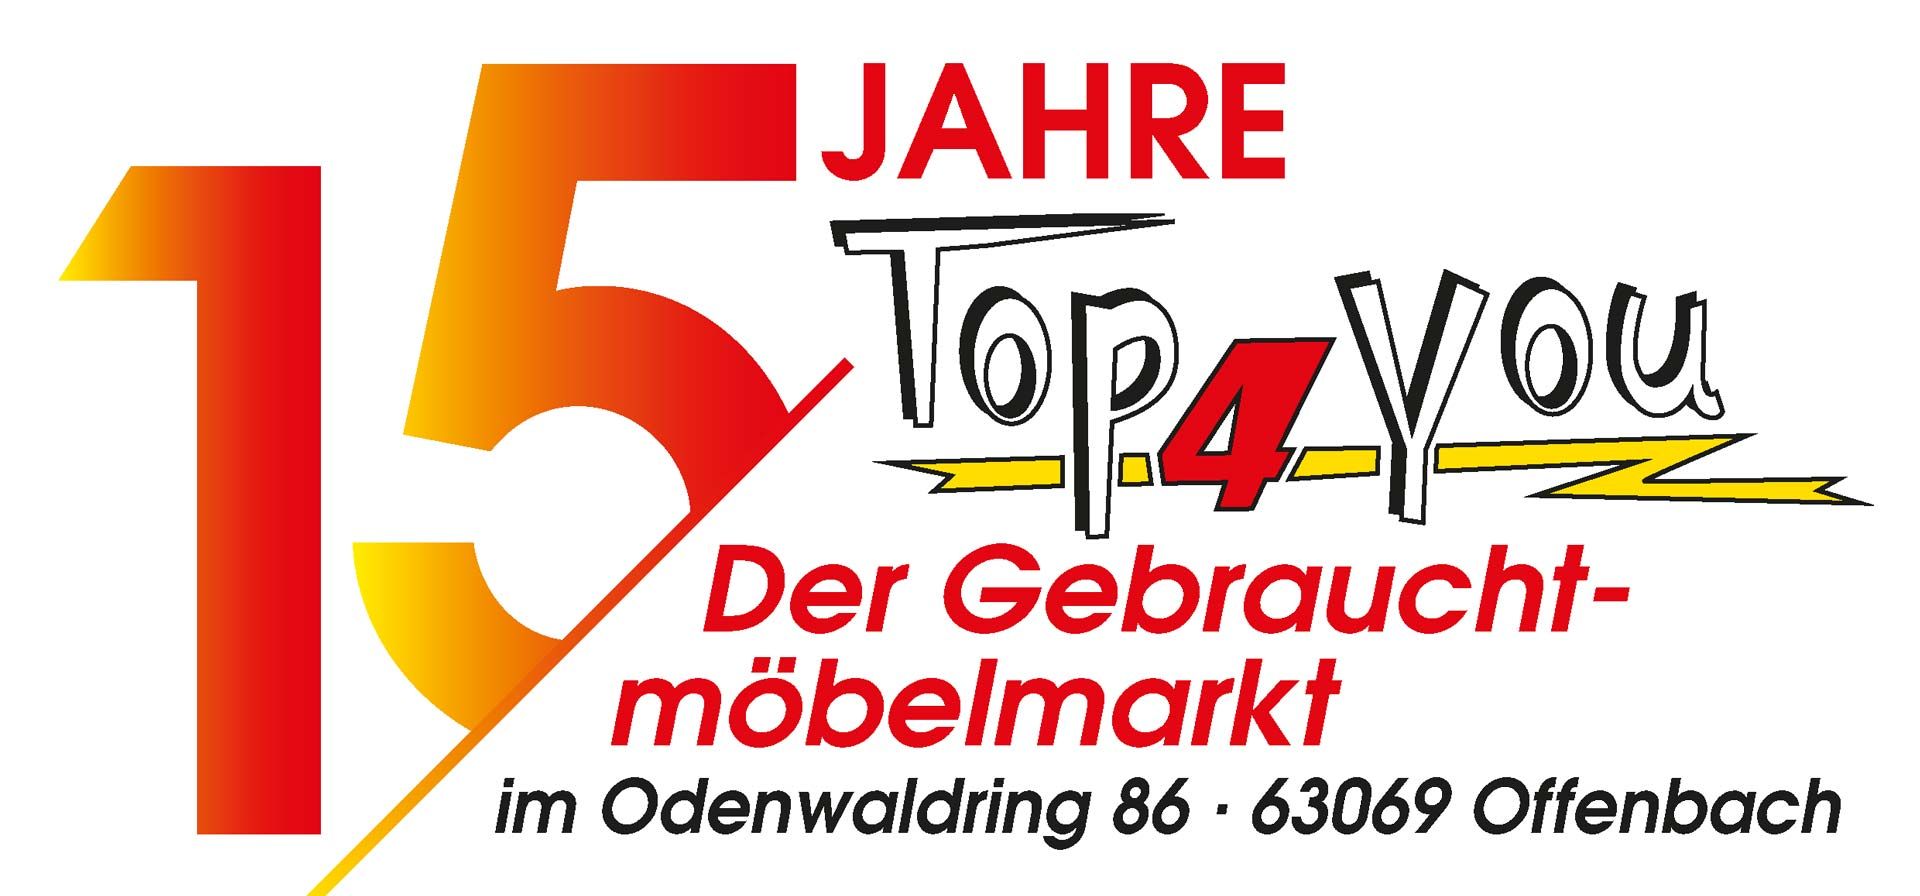 15 Jahre Top4You in Offenbach am Main